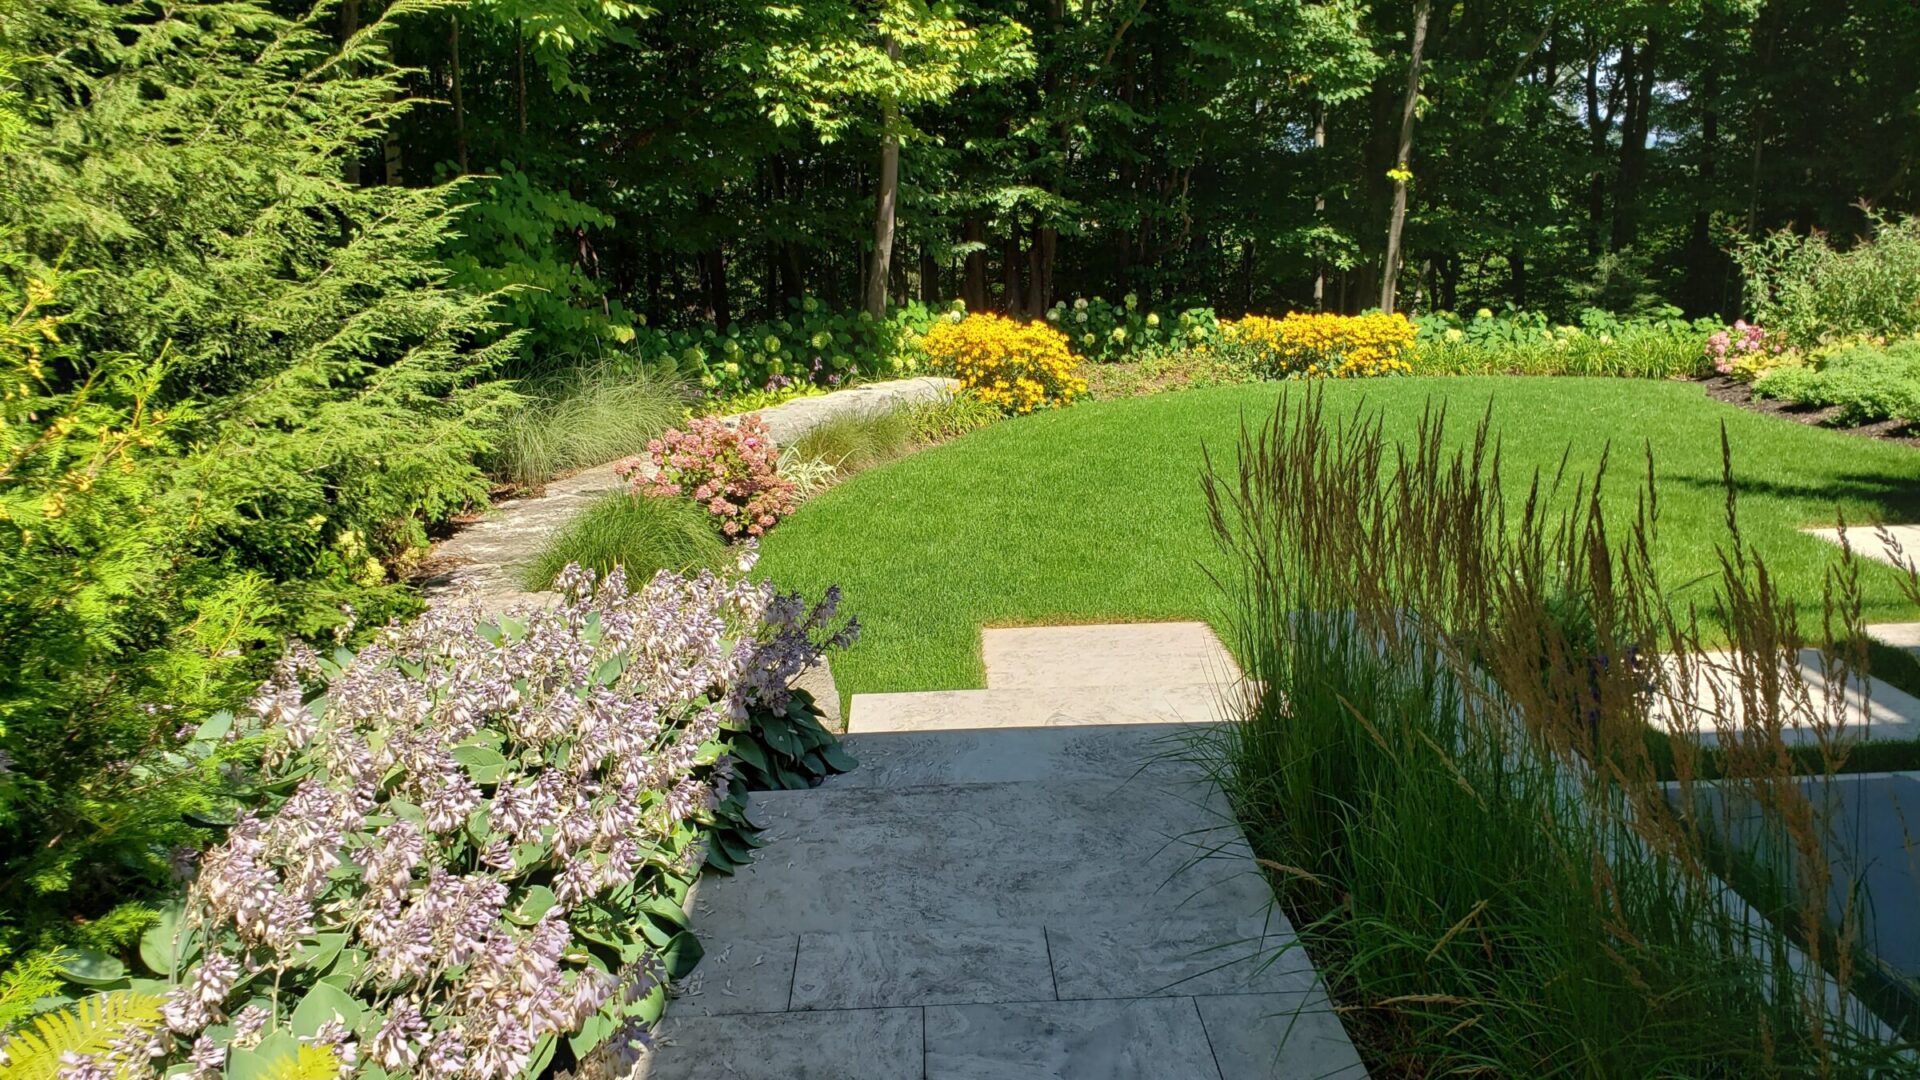 A well-manicured garden with diverse plants, a lush lawn, stone path, flowering shrubs, and a backdrop of green trees under a clear blue sky.